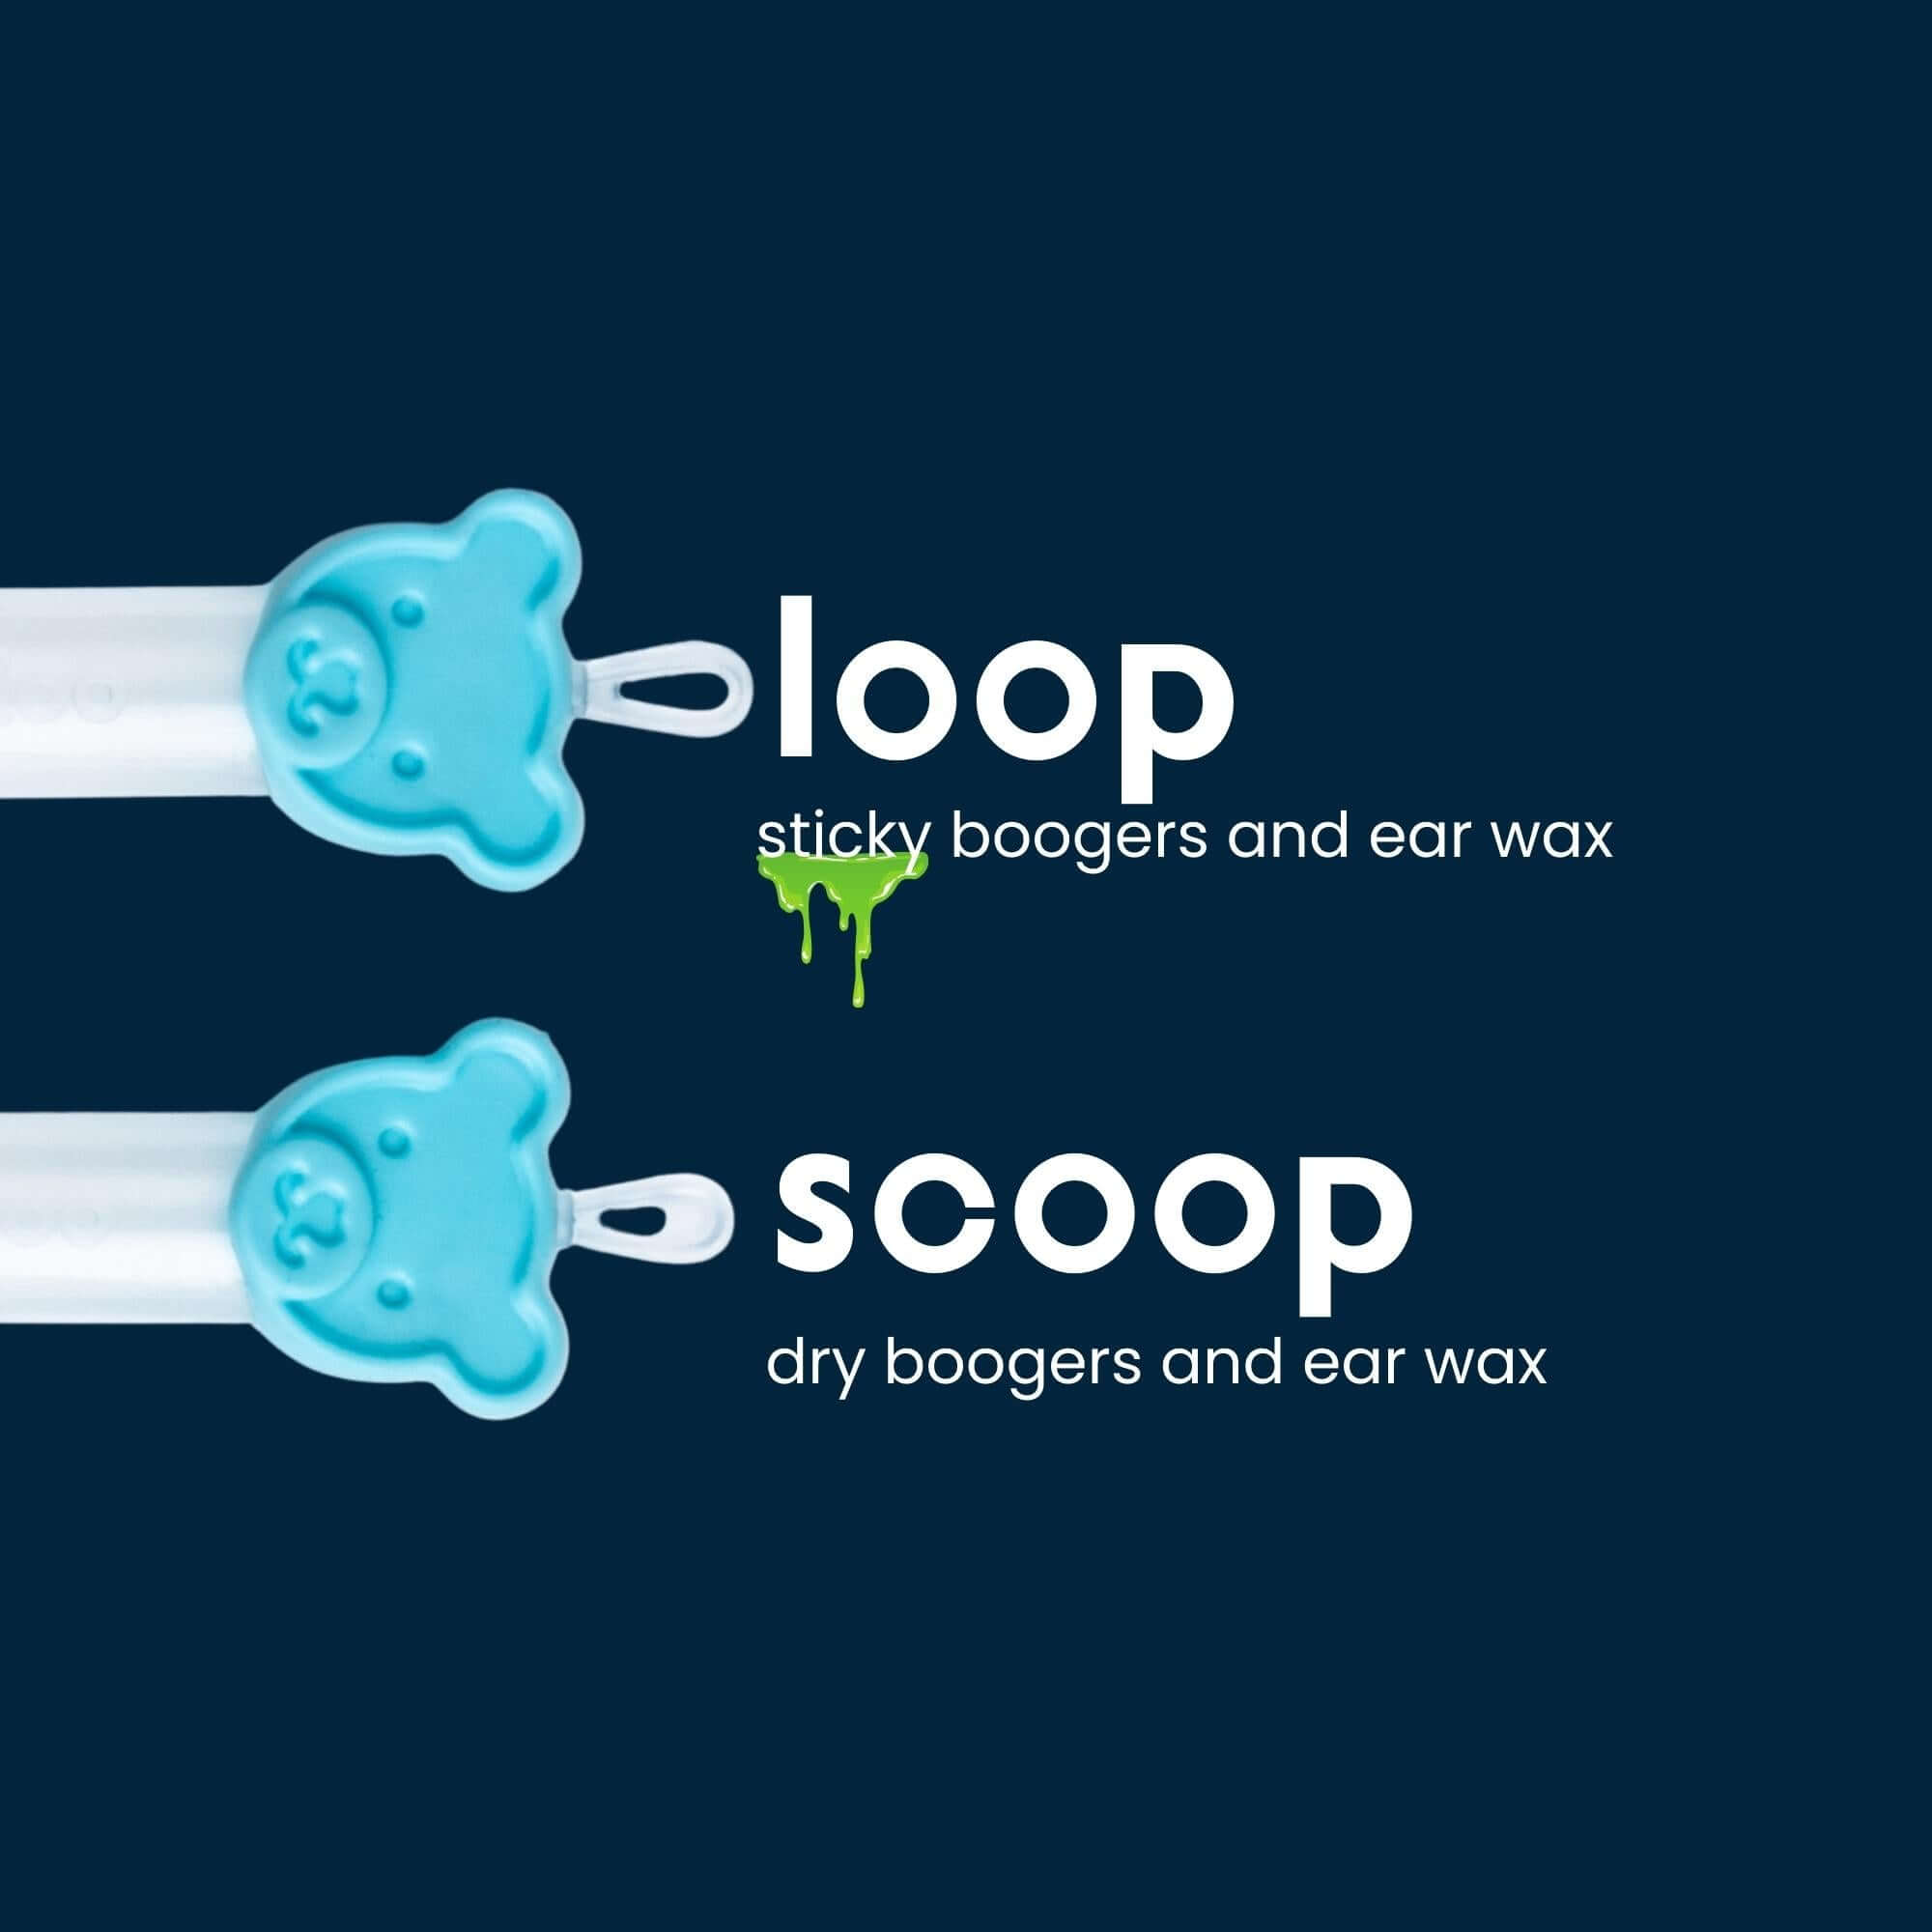 oogiebear-brite comes with a loop end attachment and a patented scoop end attachment